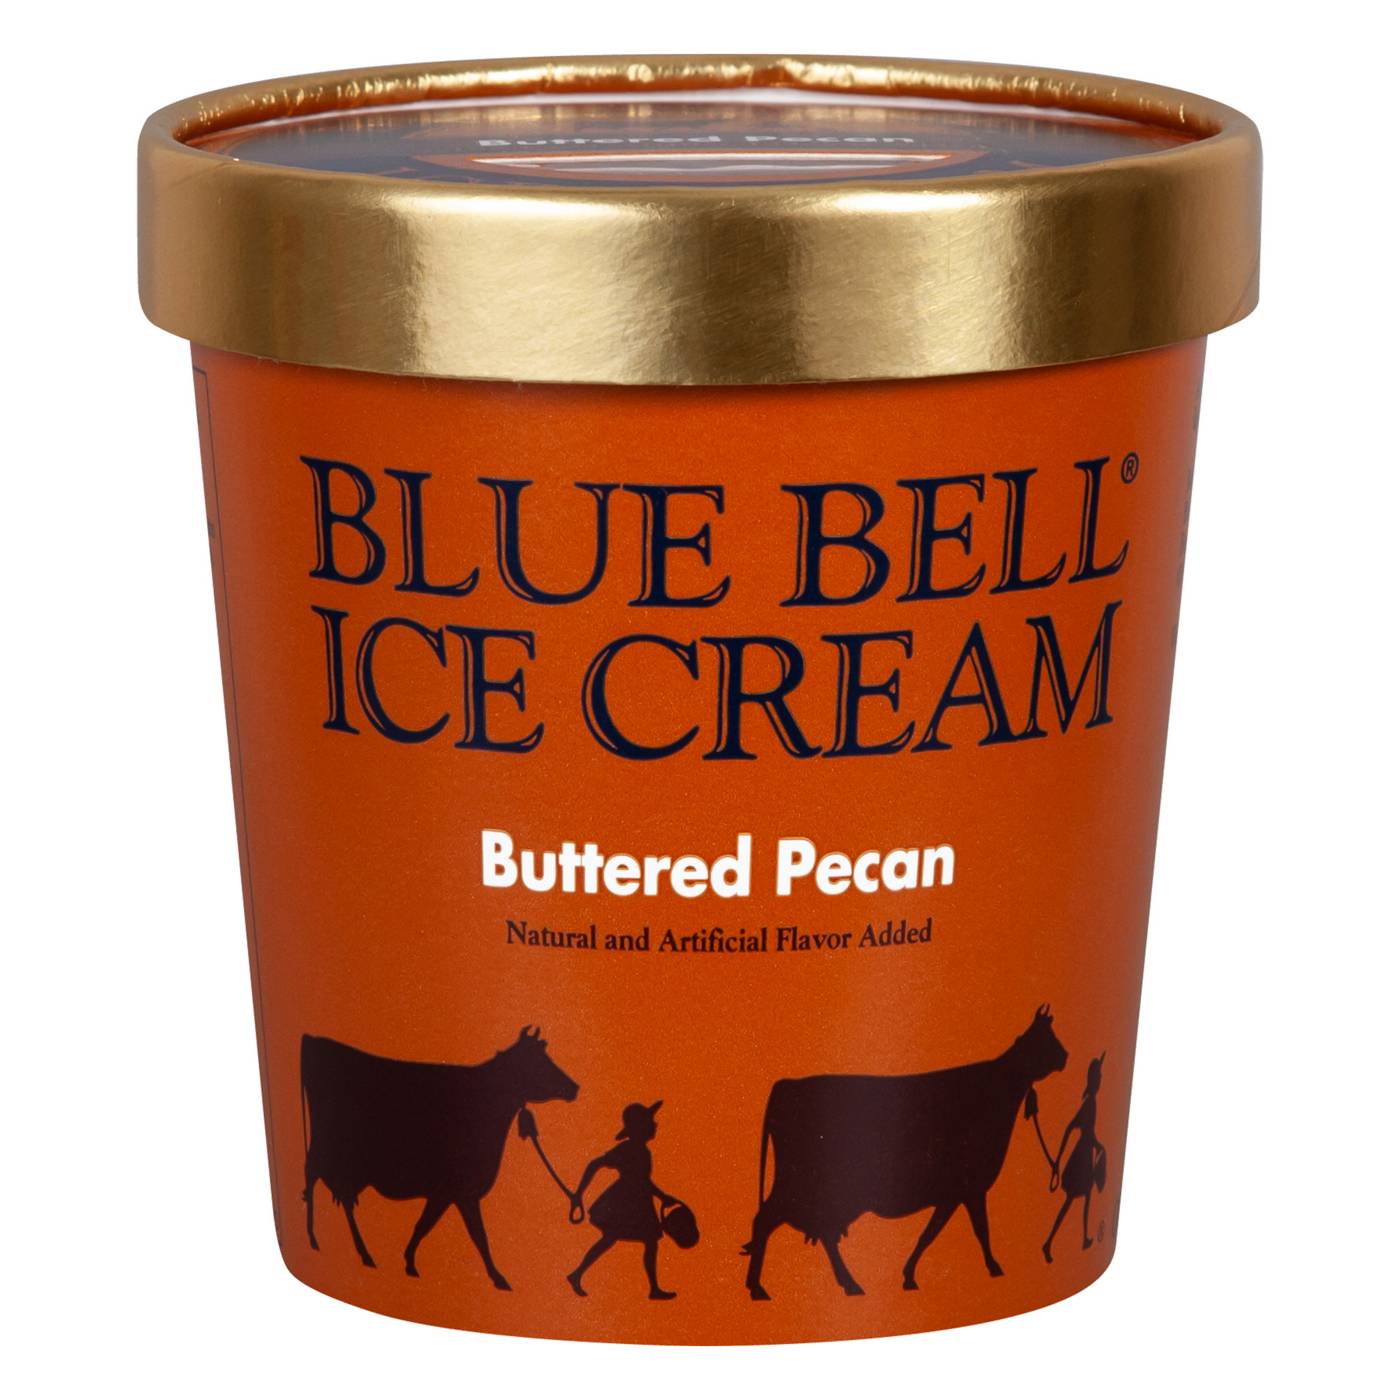 Blue Bell Buttered Pecan Ice Cream; image 1 of 2